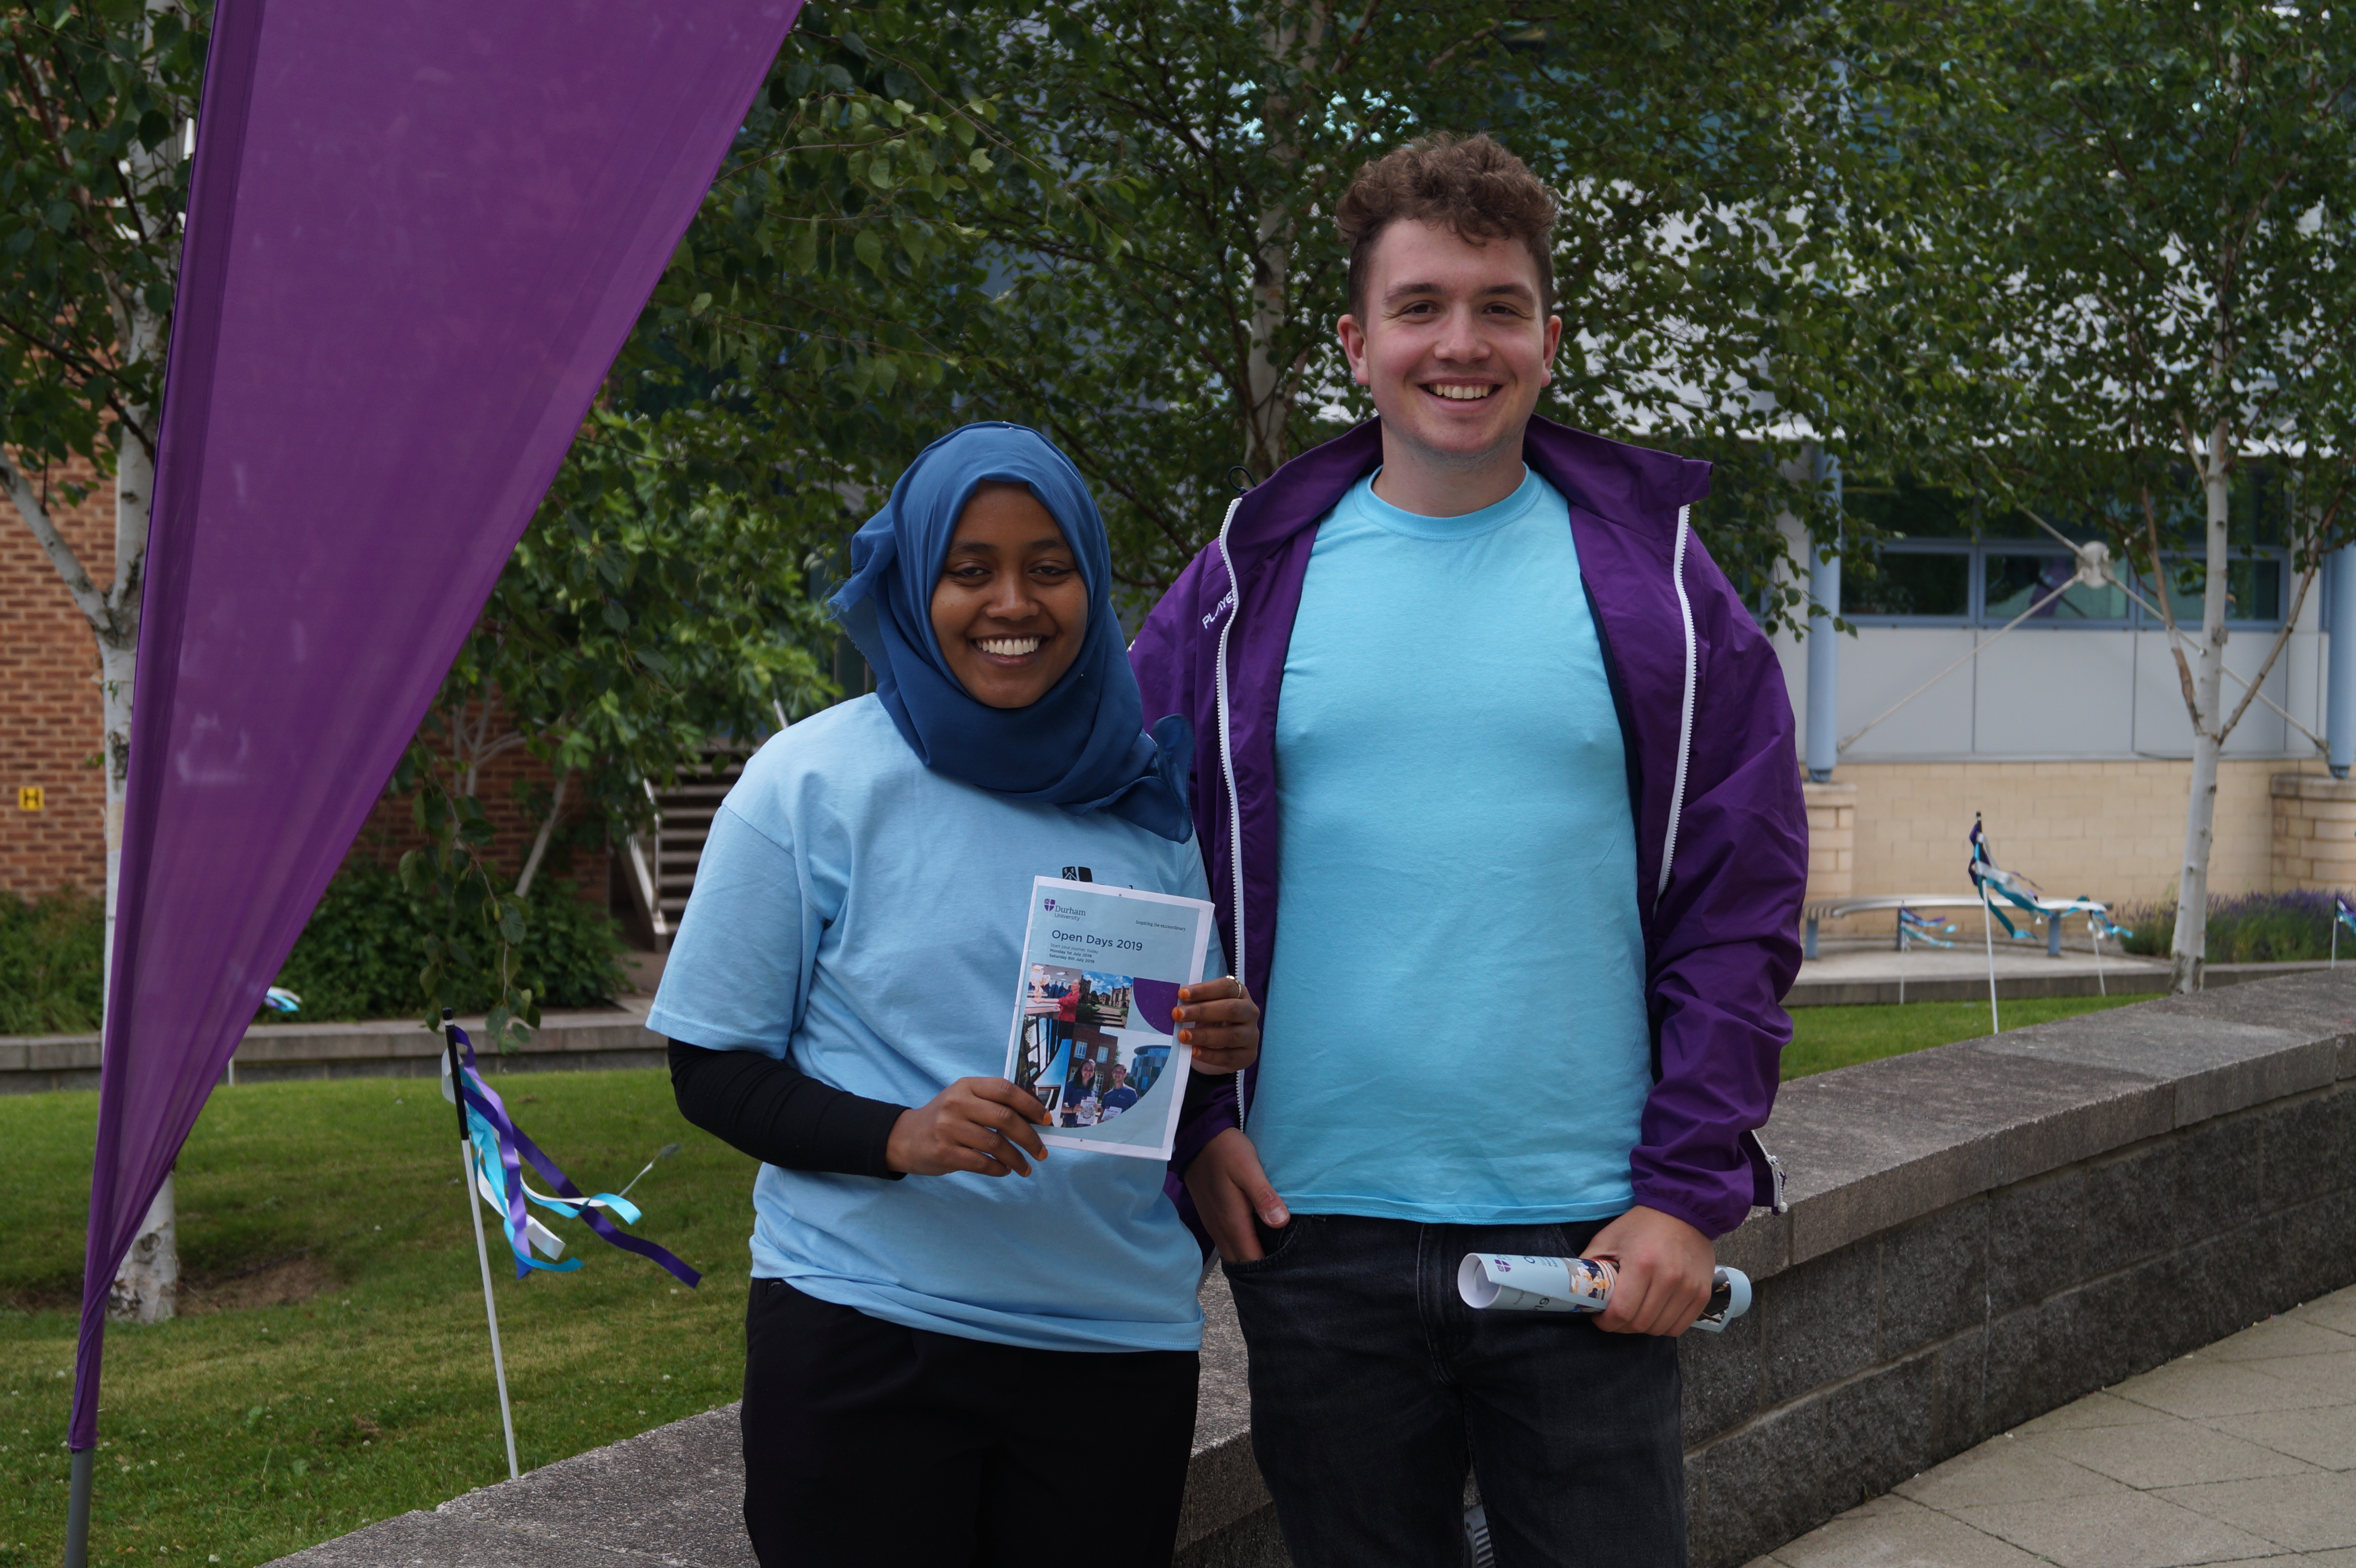 Two open day ambassadors, one holding an Open Day Guide